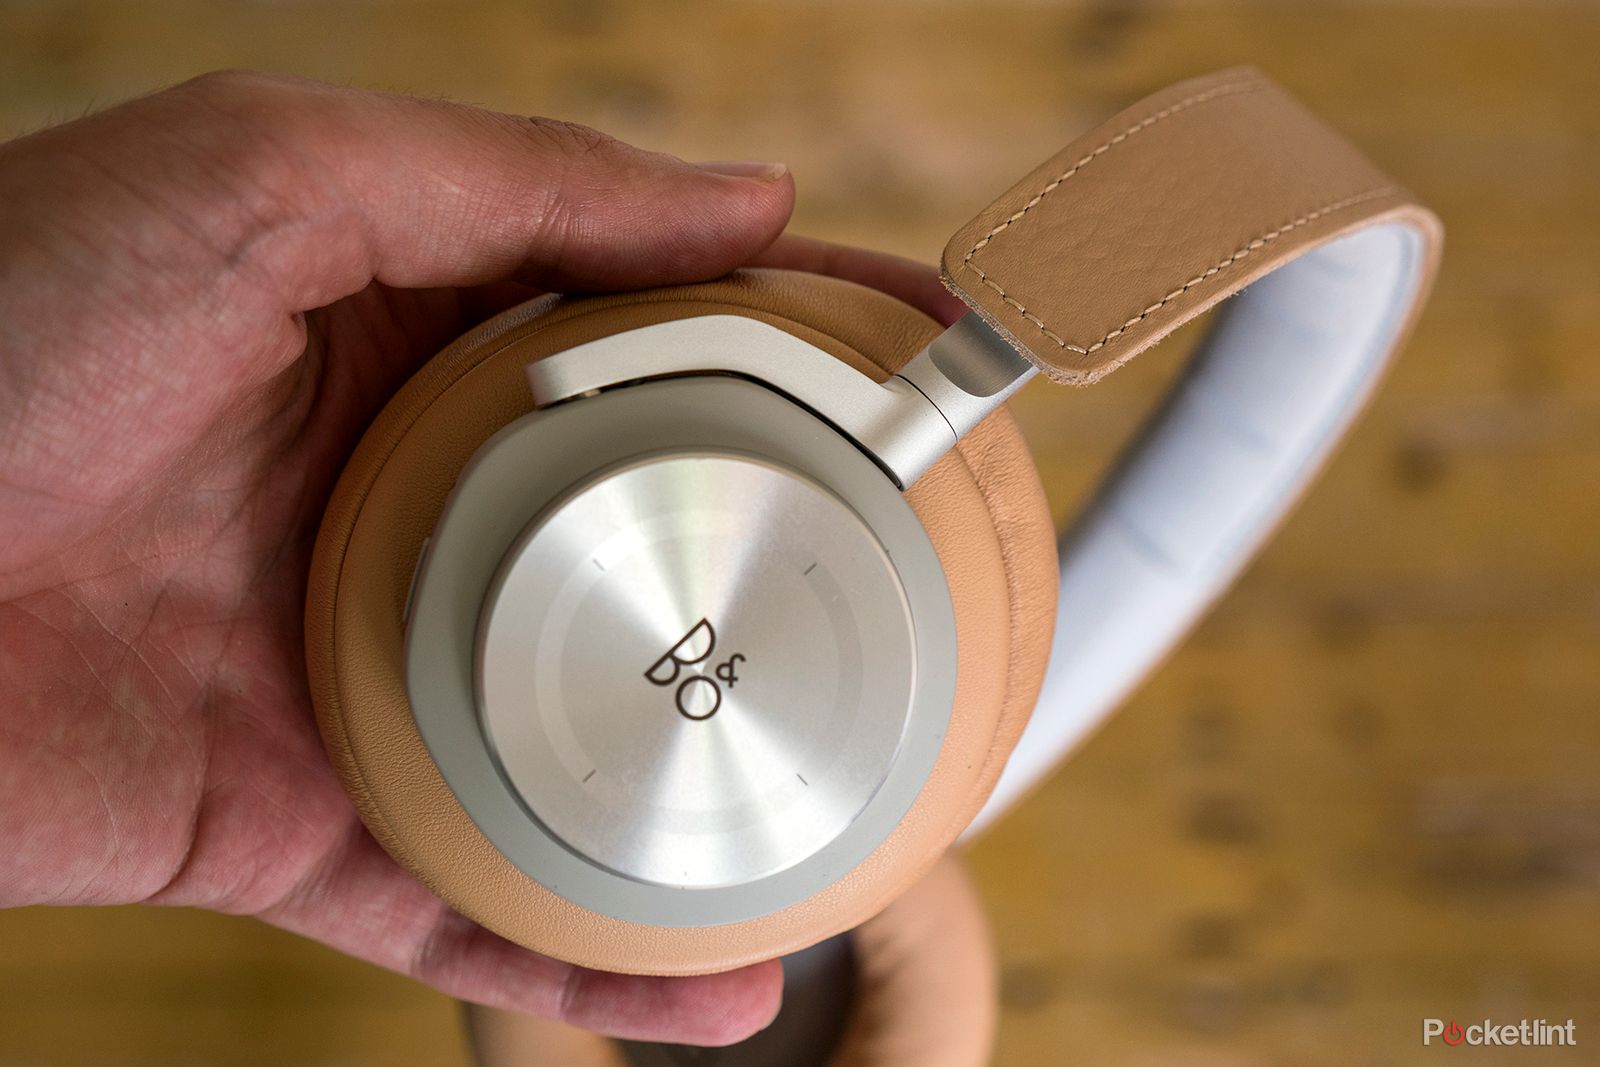 b o beoplay h7 review image 2